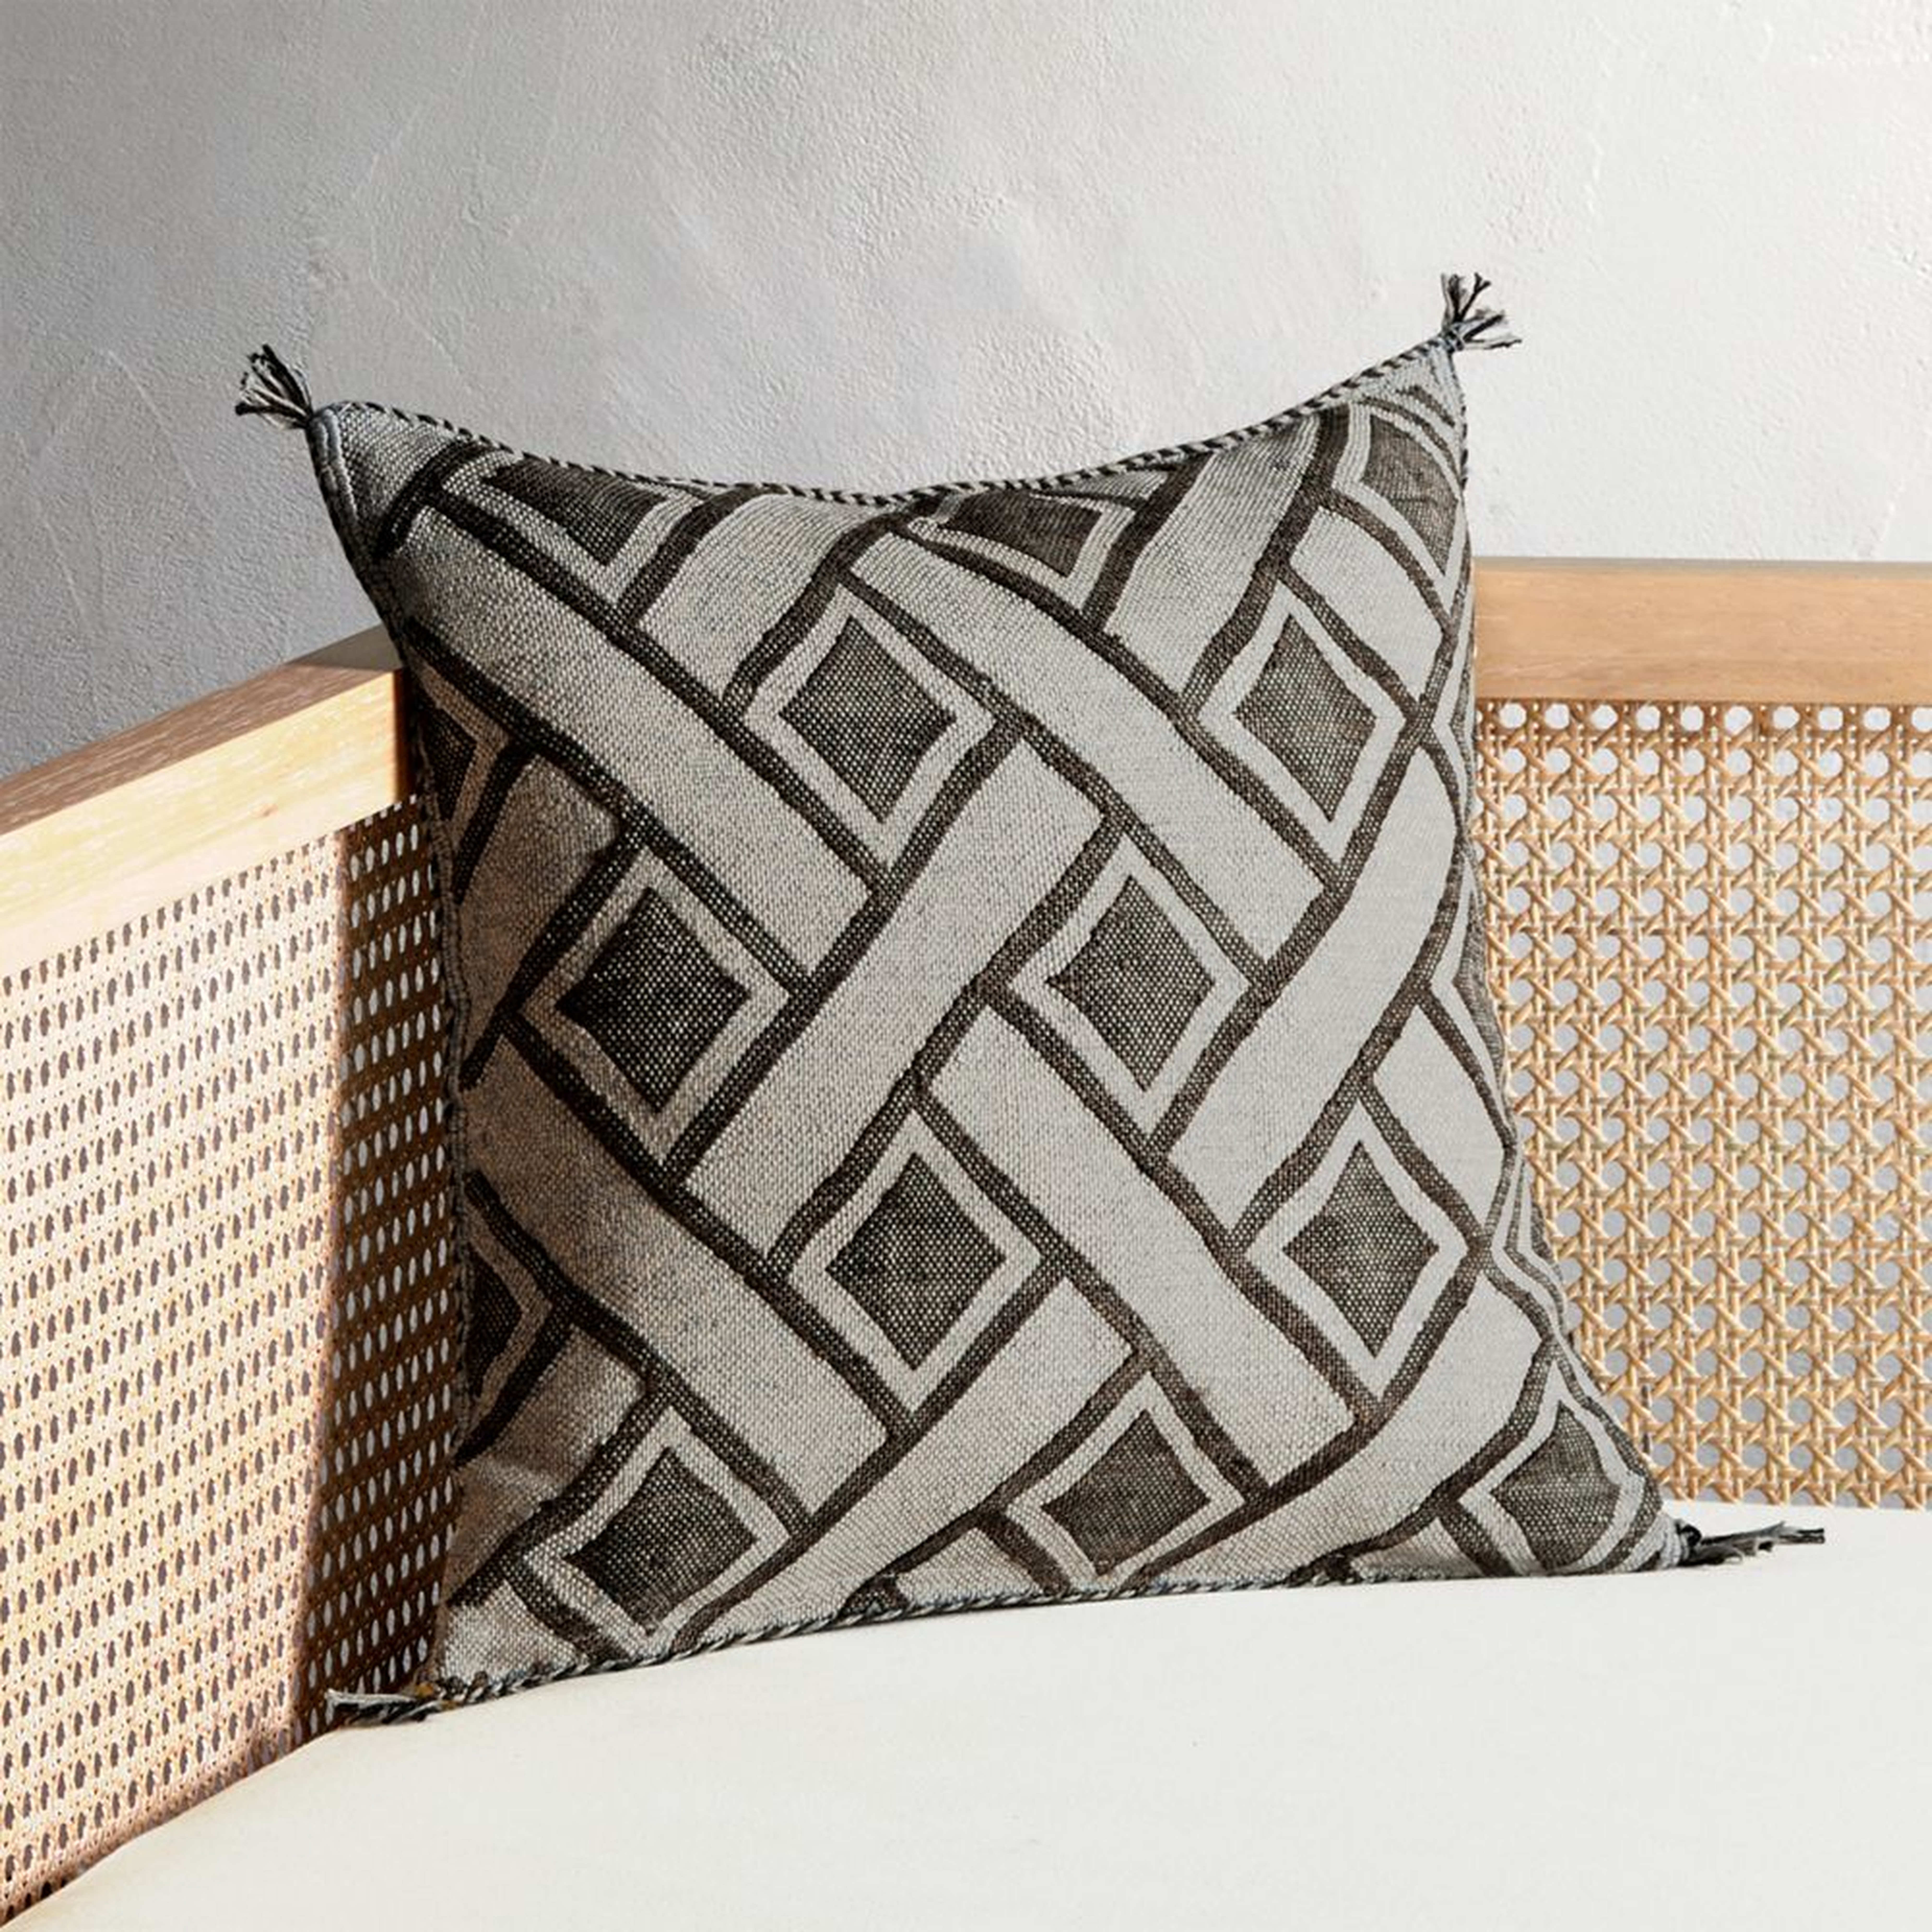 16" Moroccan Graphic Pillow with Feather-Down Insert - CB2